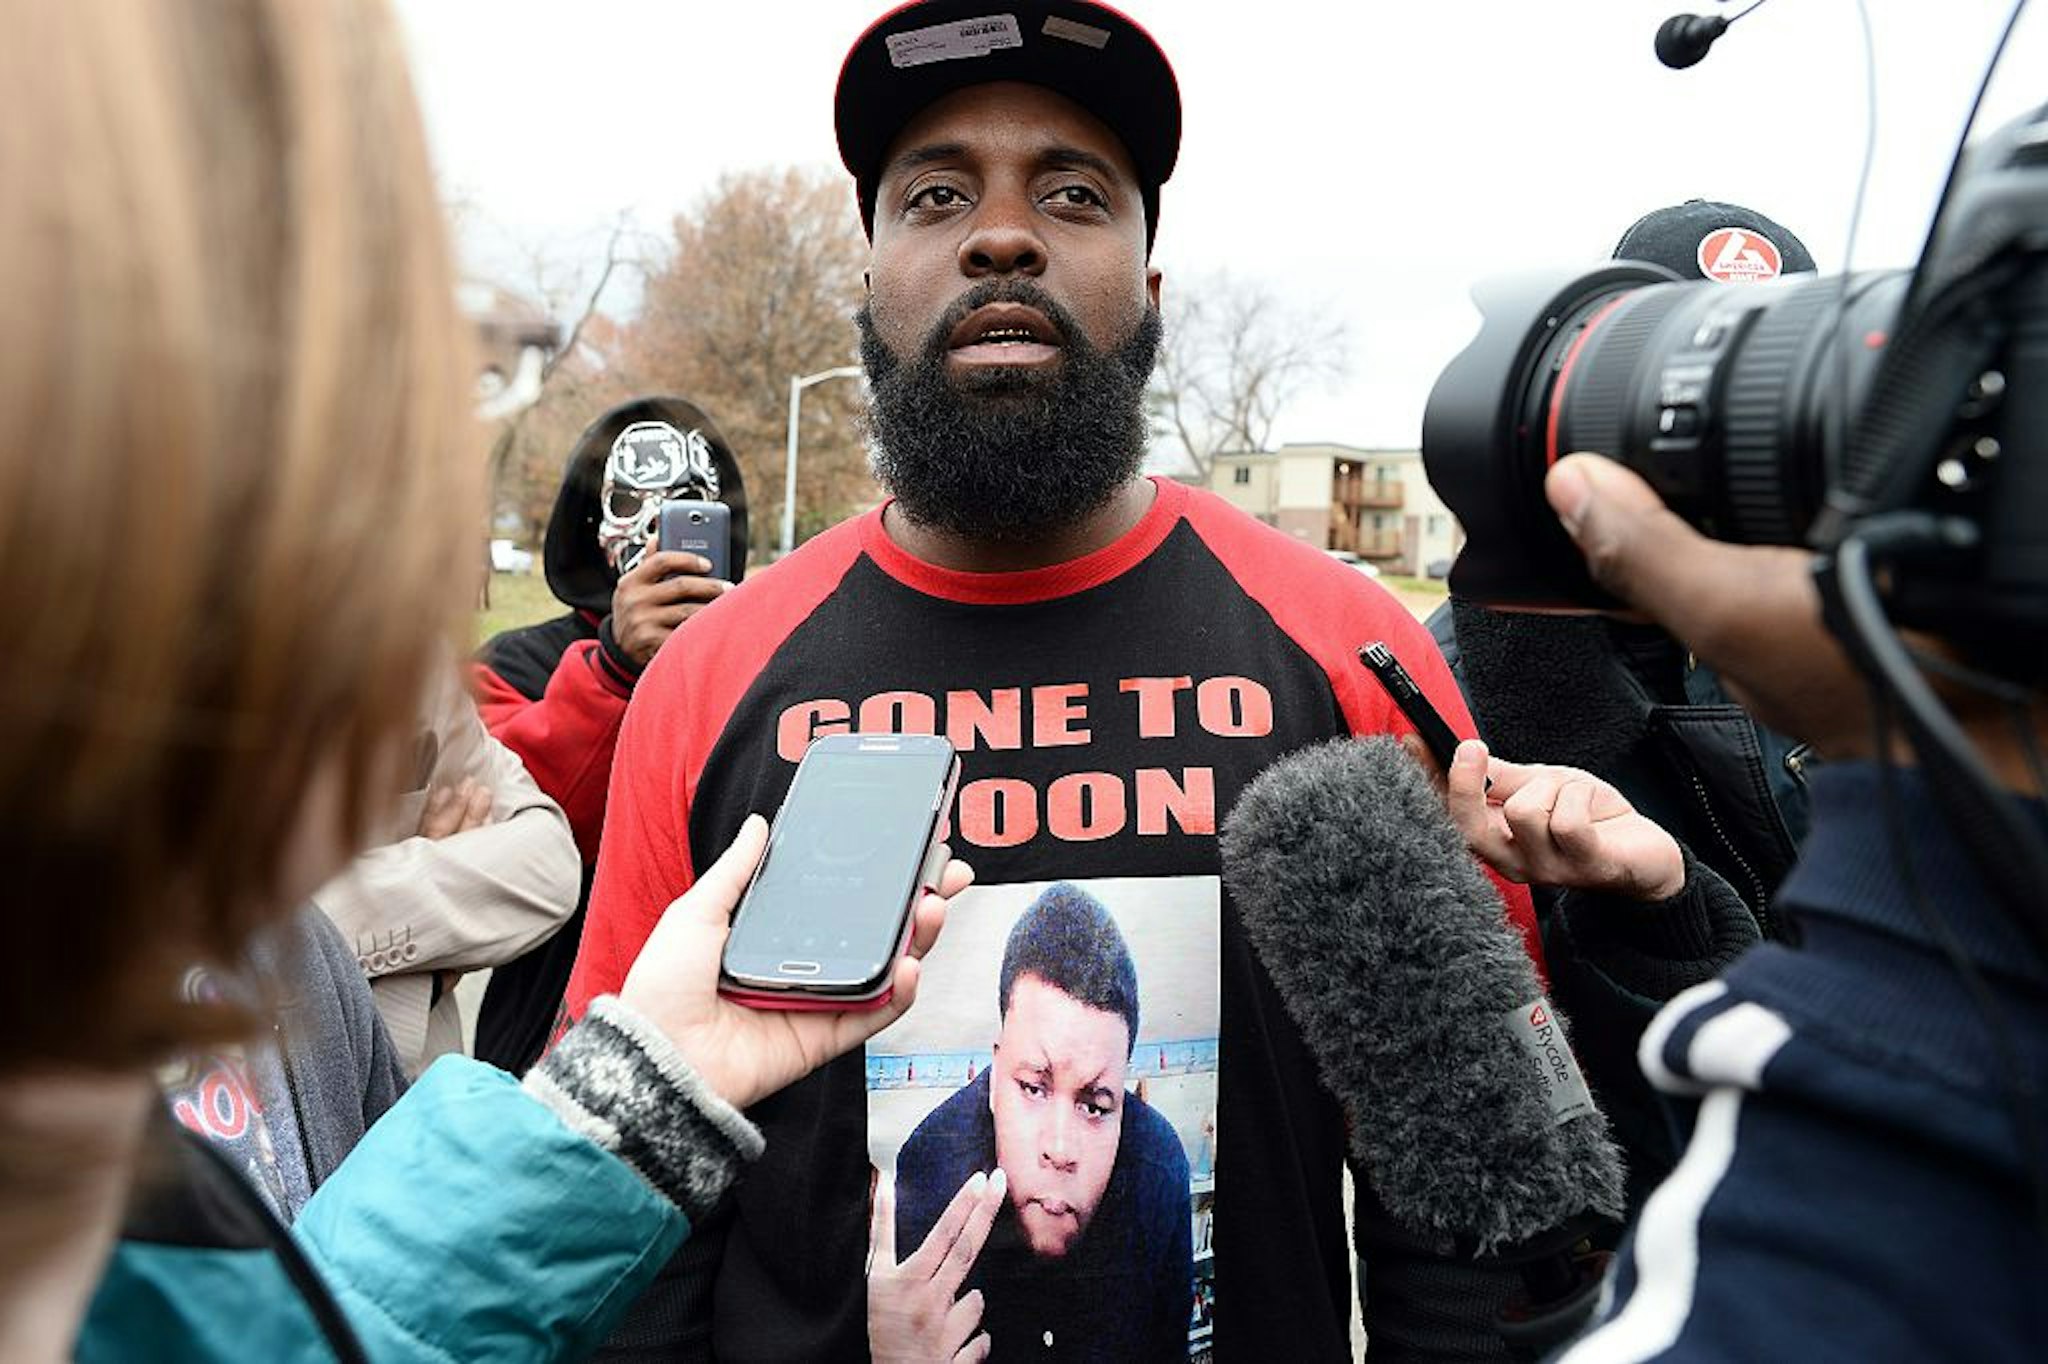 Michael Brown Sr. (C), the father of 18-year-old Michael Brown who was shot dead by a police officer, speaks to journalists as he distributes turkeys for Thanksgiving where his son was killed in Ferguson, Missouri, on November 22, 2014.